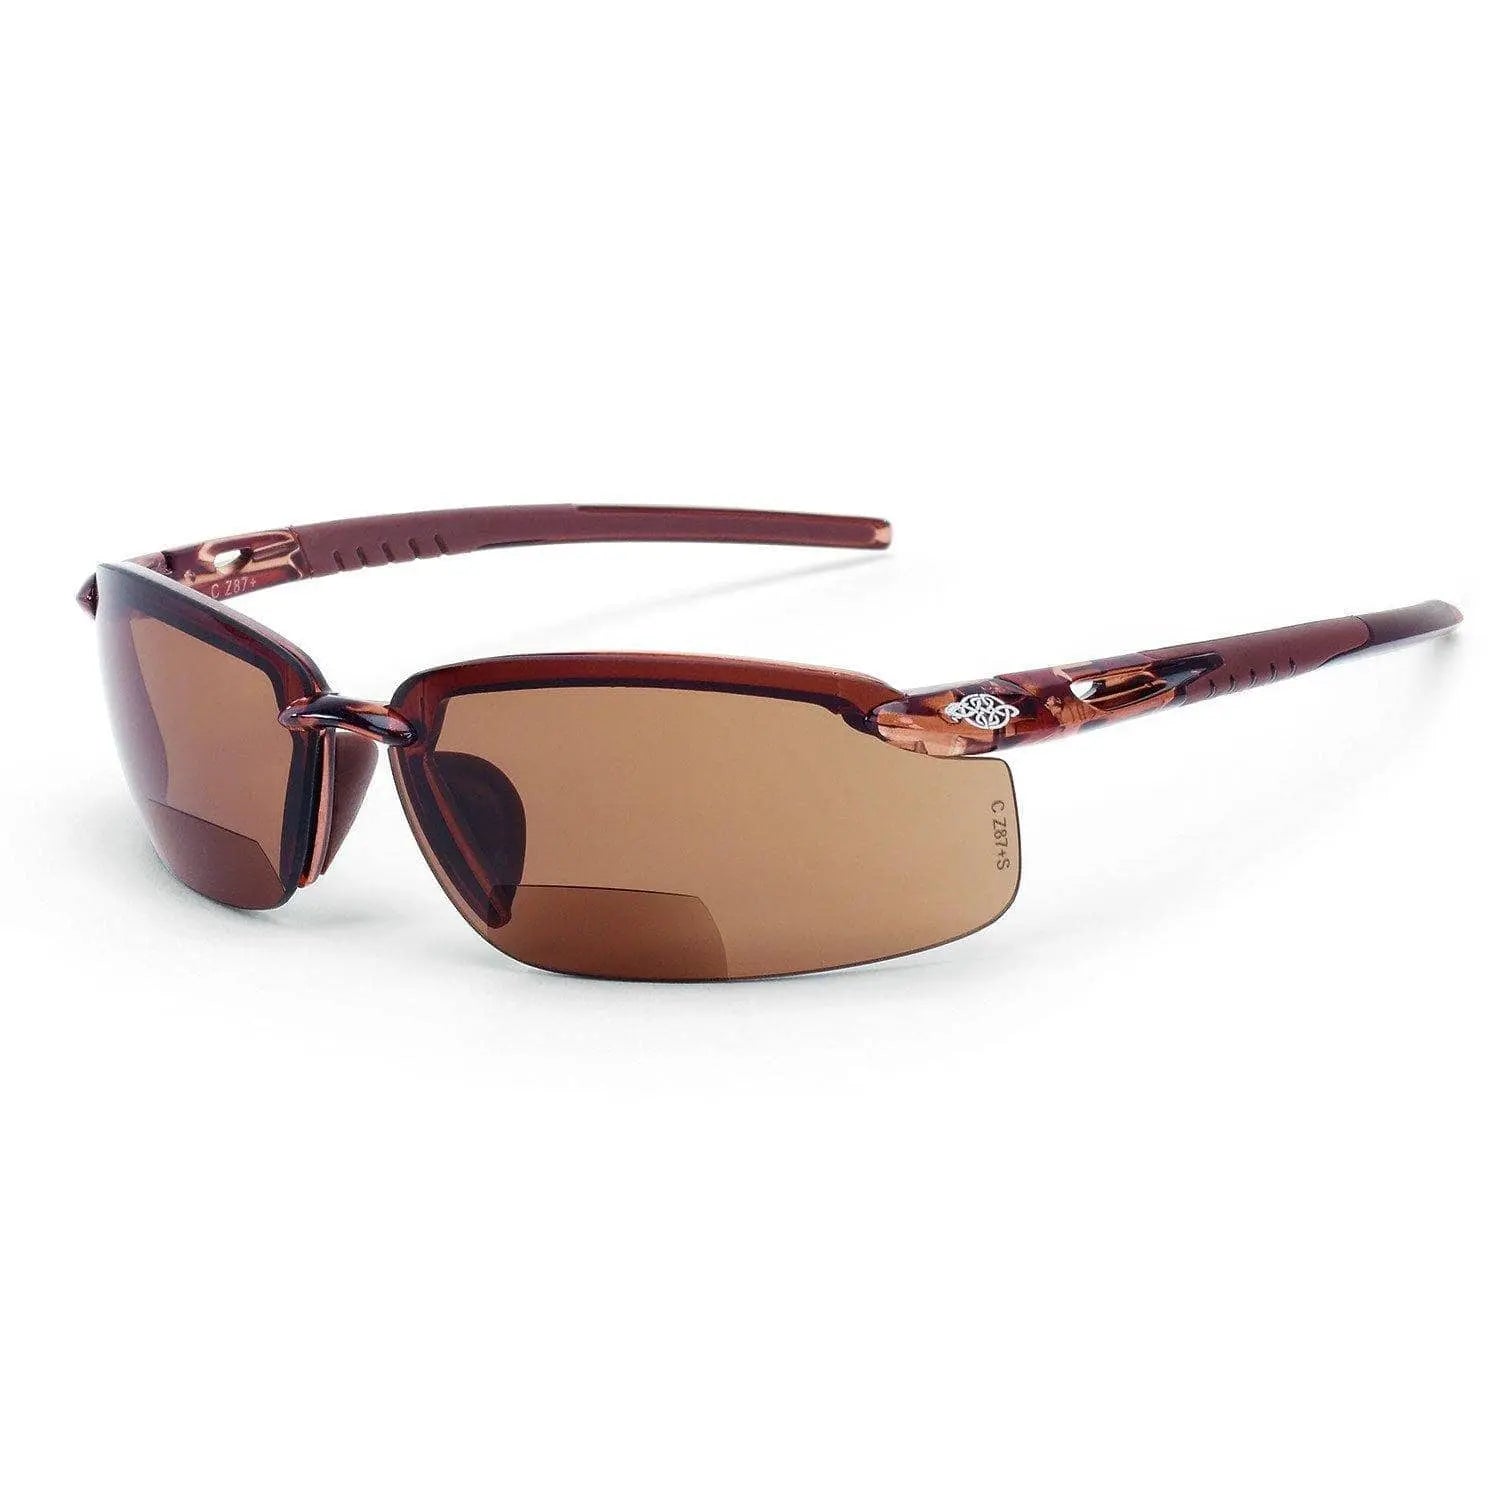 CROSSFIRE - ES5 Bifocal Safety Eyewear 2.0 Diopter, Crystal Brown - Becker Safety and Supply